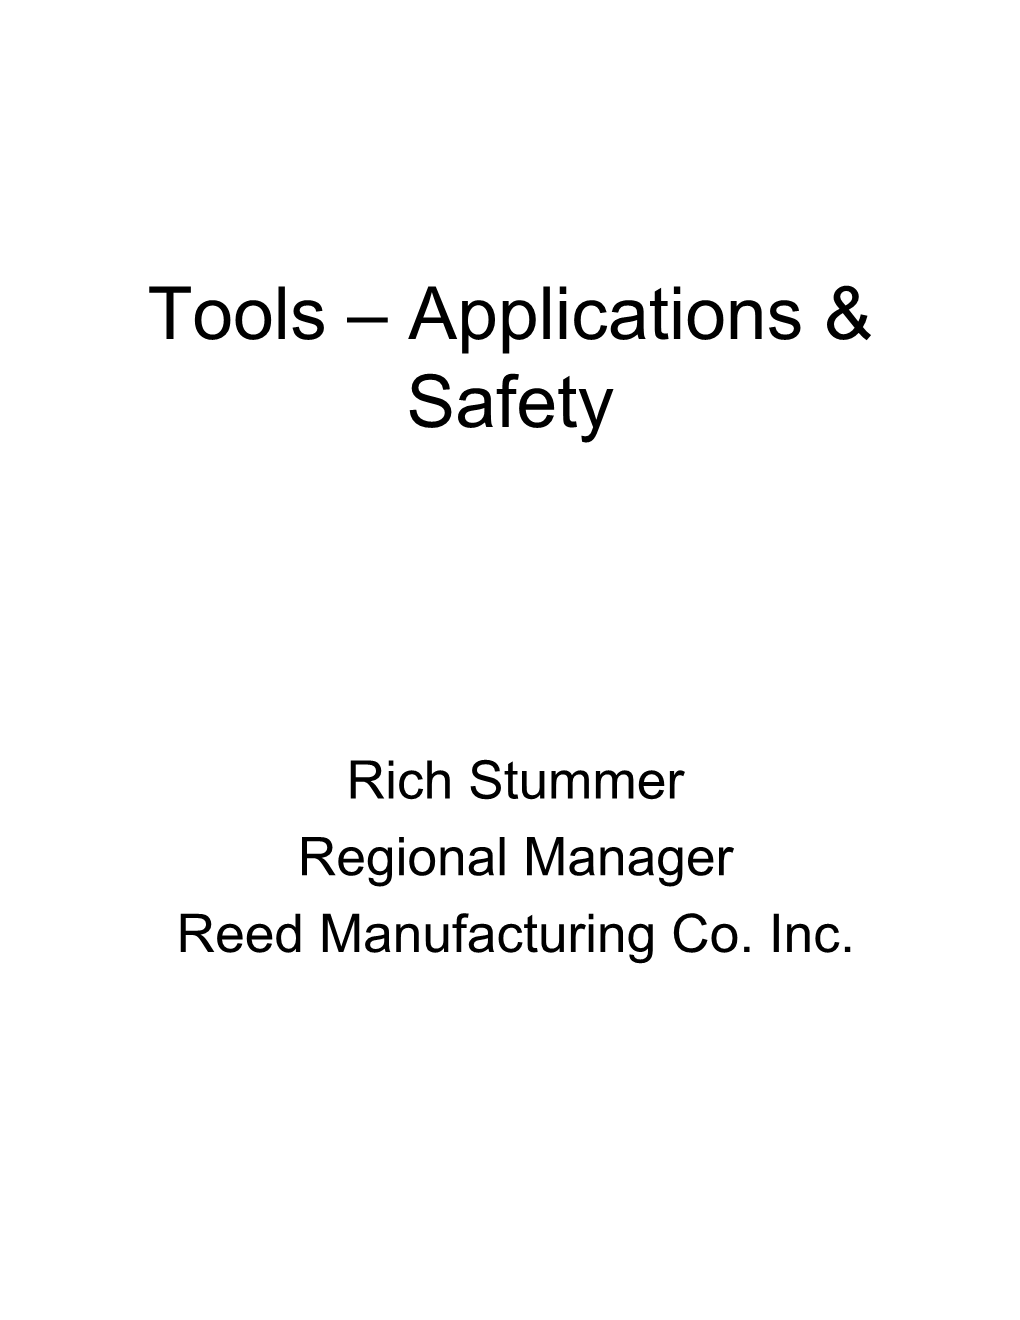 Tools – Applications & Safety